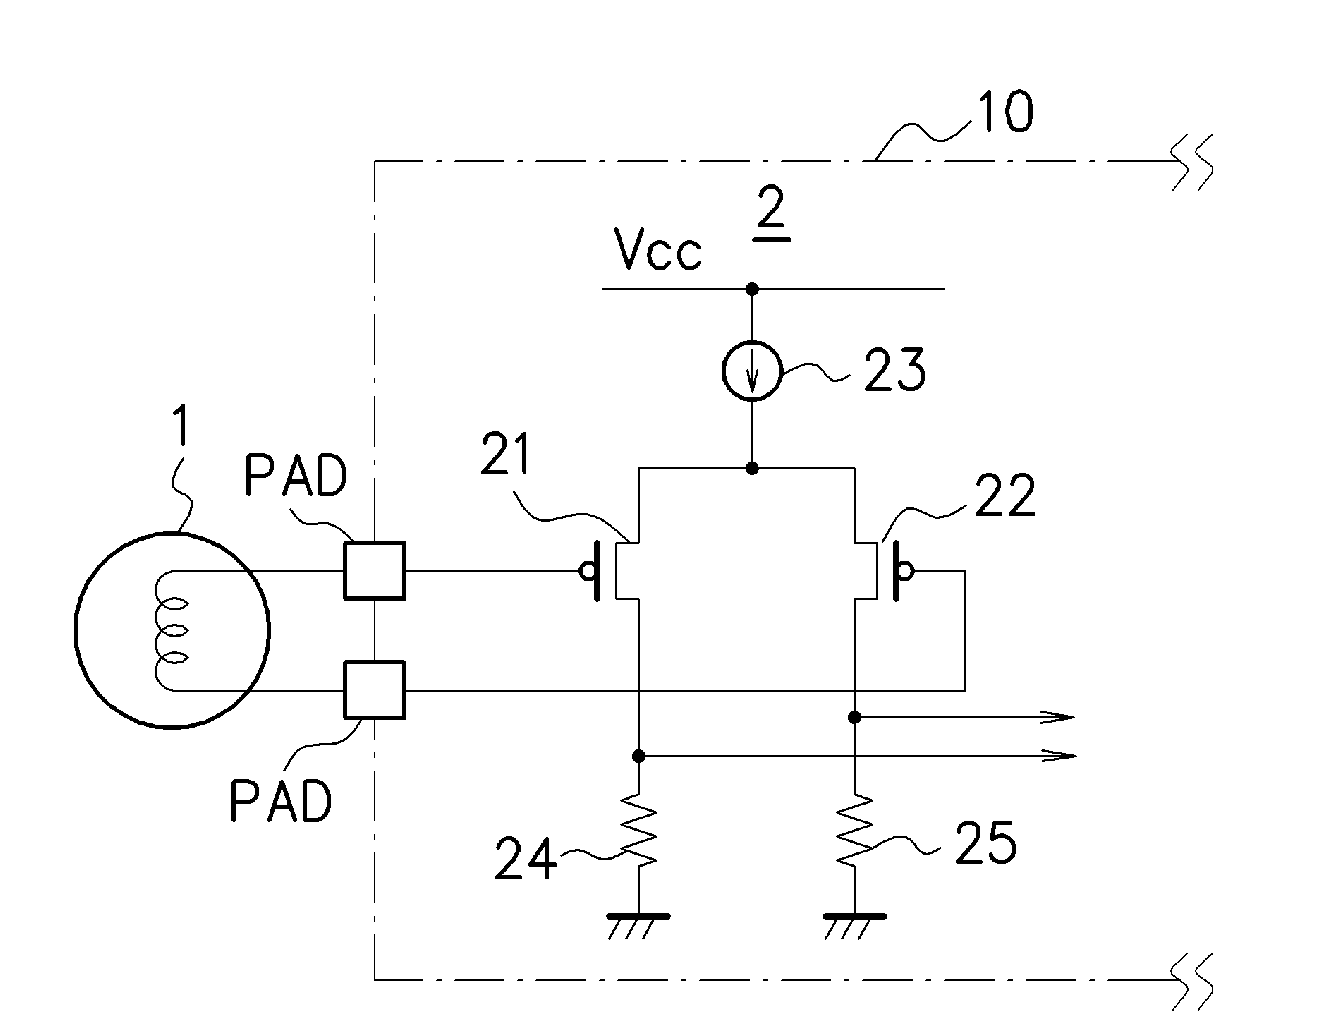 Loop antenna input circuit for am and am radio receiver using the same